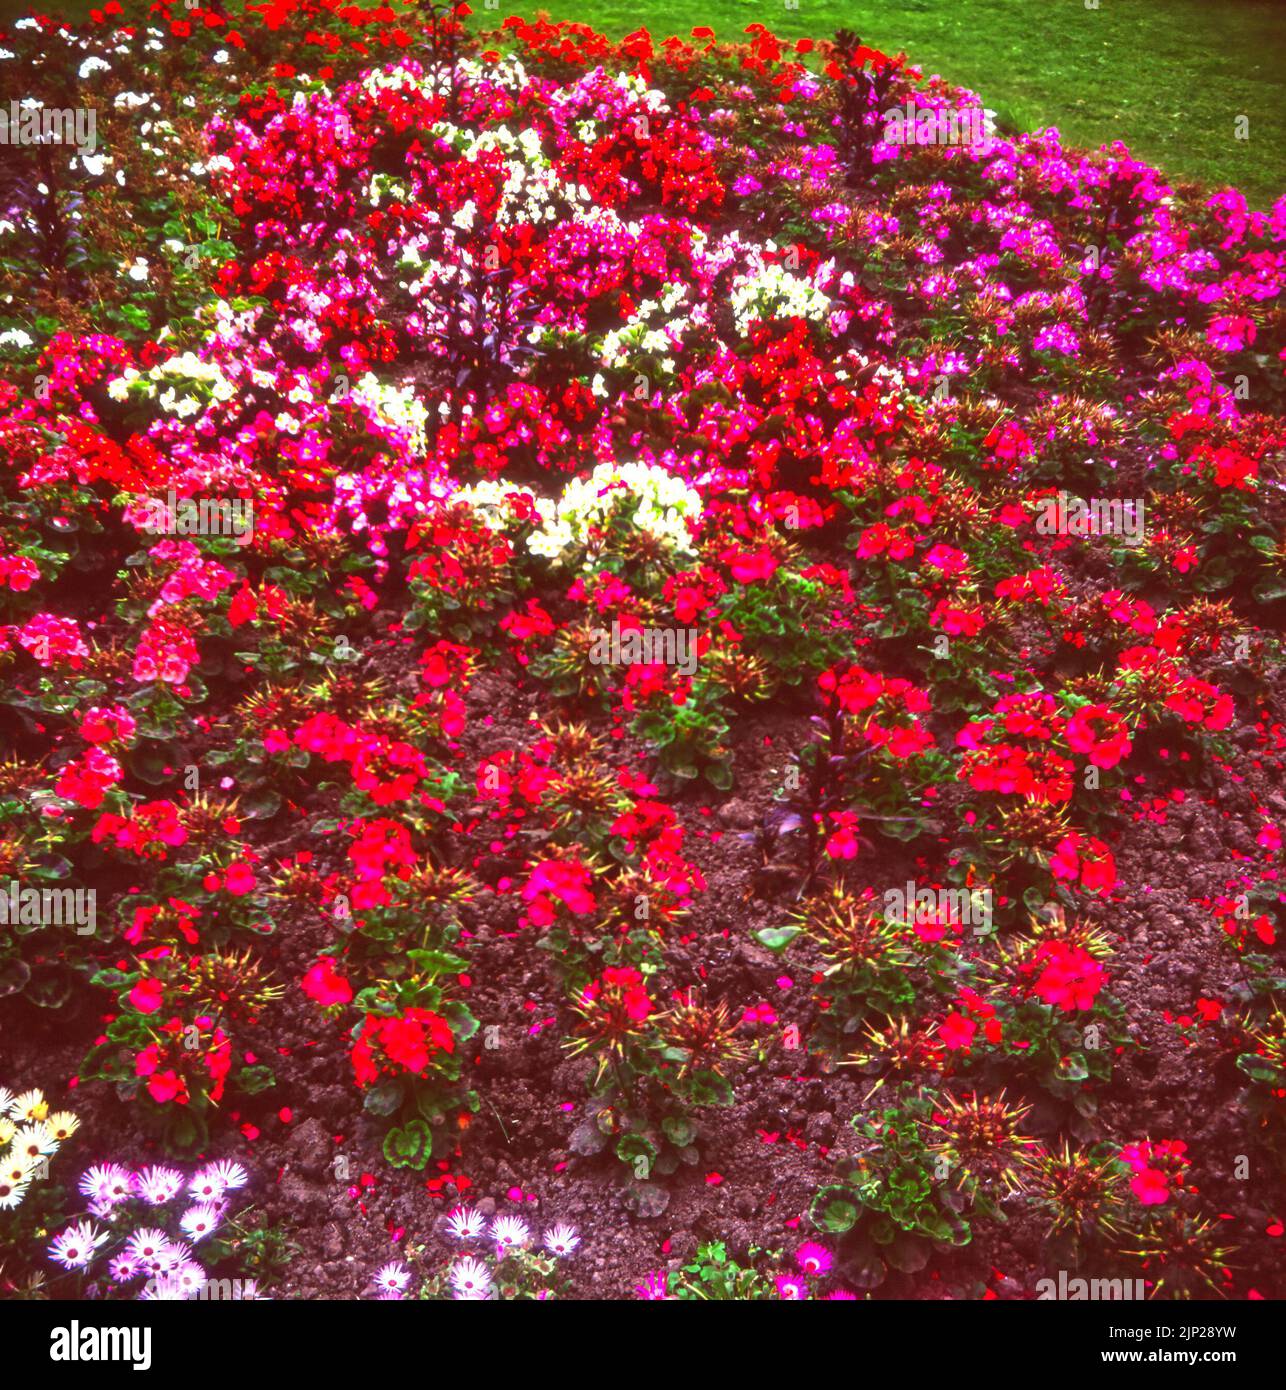 A floral display of colourful summer flowering bedding plants in a pink and red geranium flower bed Stock Photo